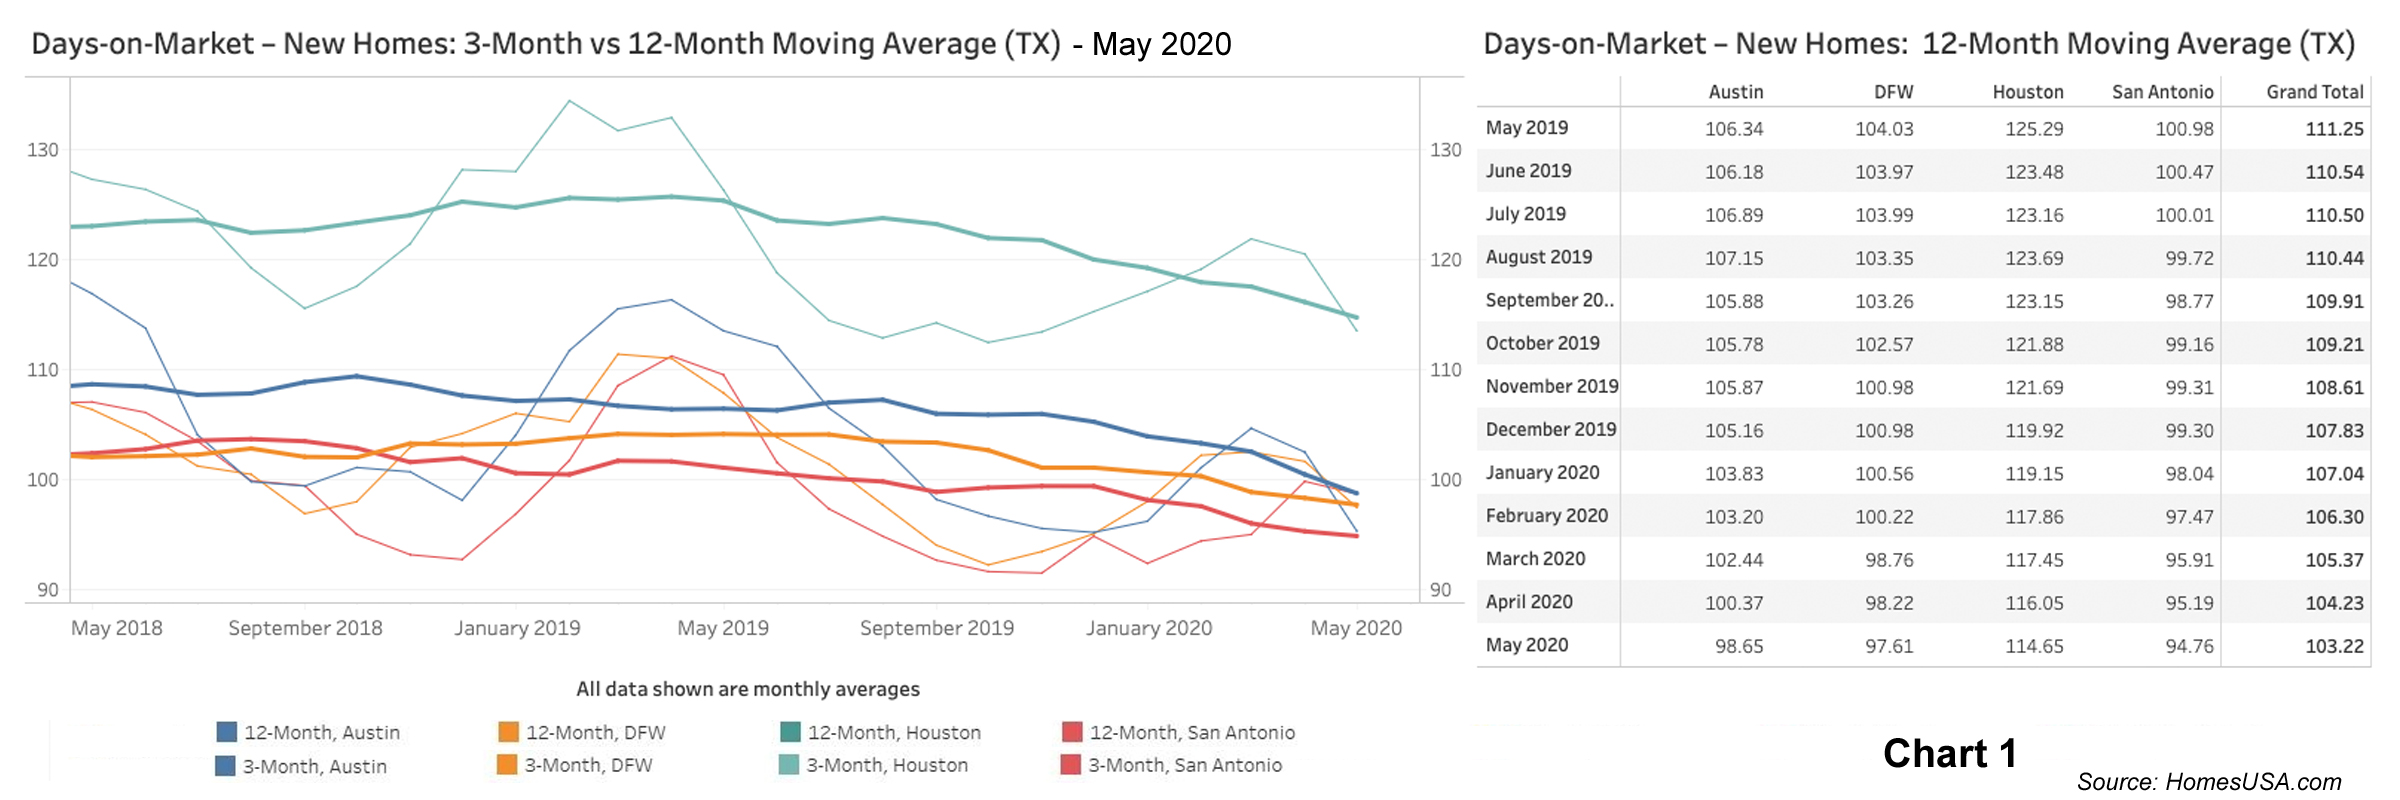 Chart 1: Texas New Homes: Days on Market - May 2020